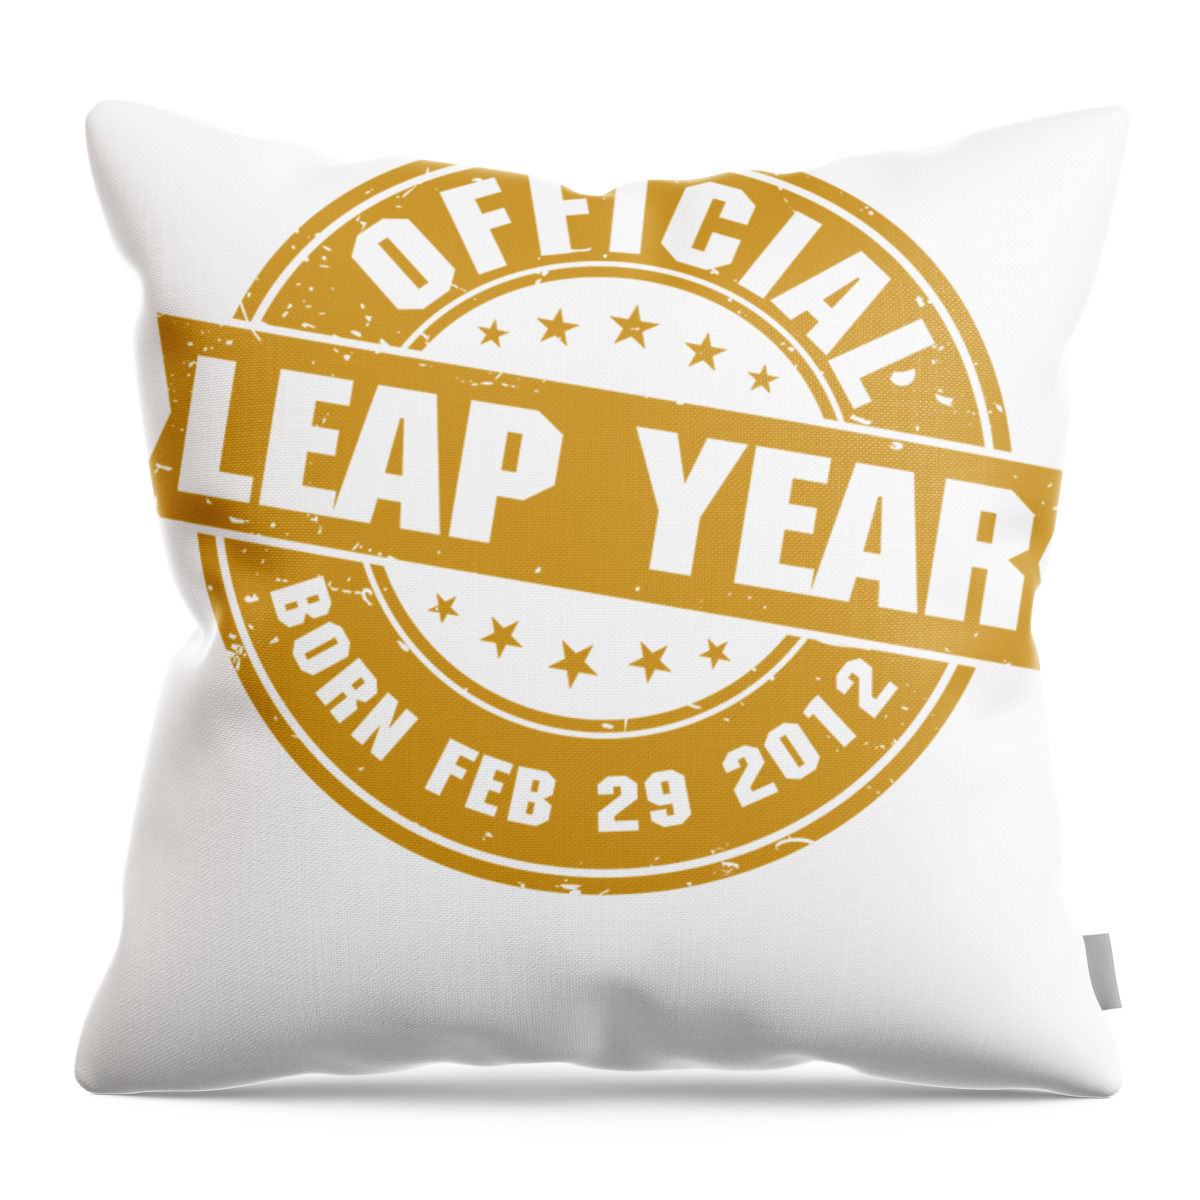 February 29th Leap Day Birthday 2012 Girls Boys Year 2012 Gift Leap Day 2/29 9Th Birthday Throw Pillow Multicolor 16x16